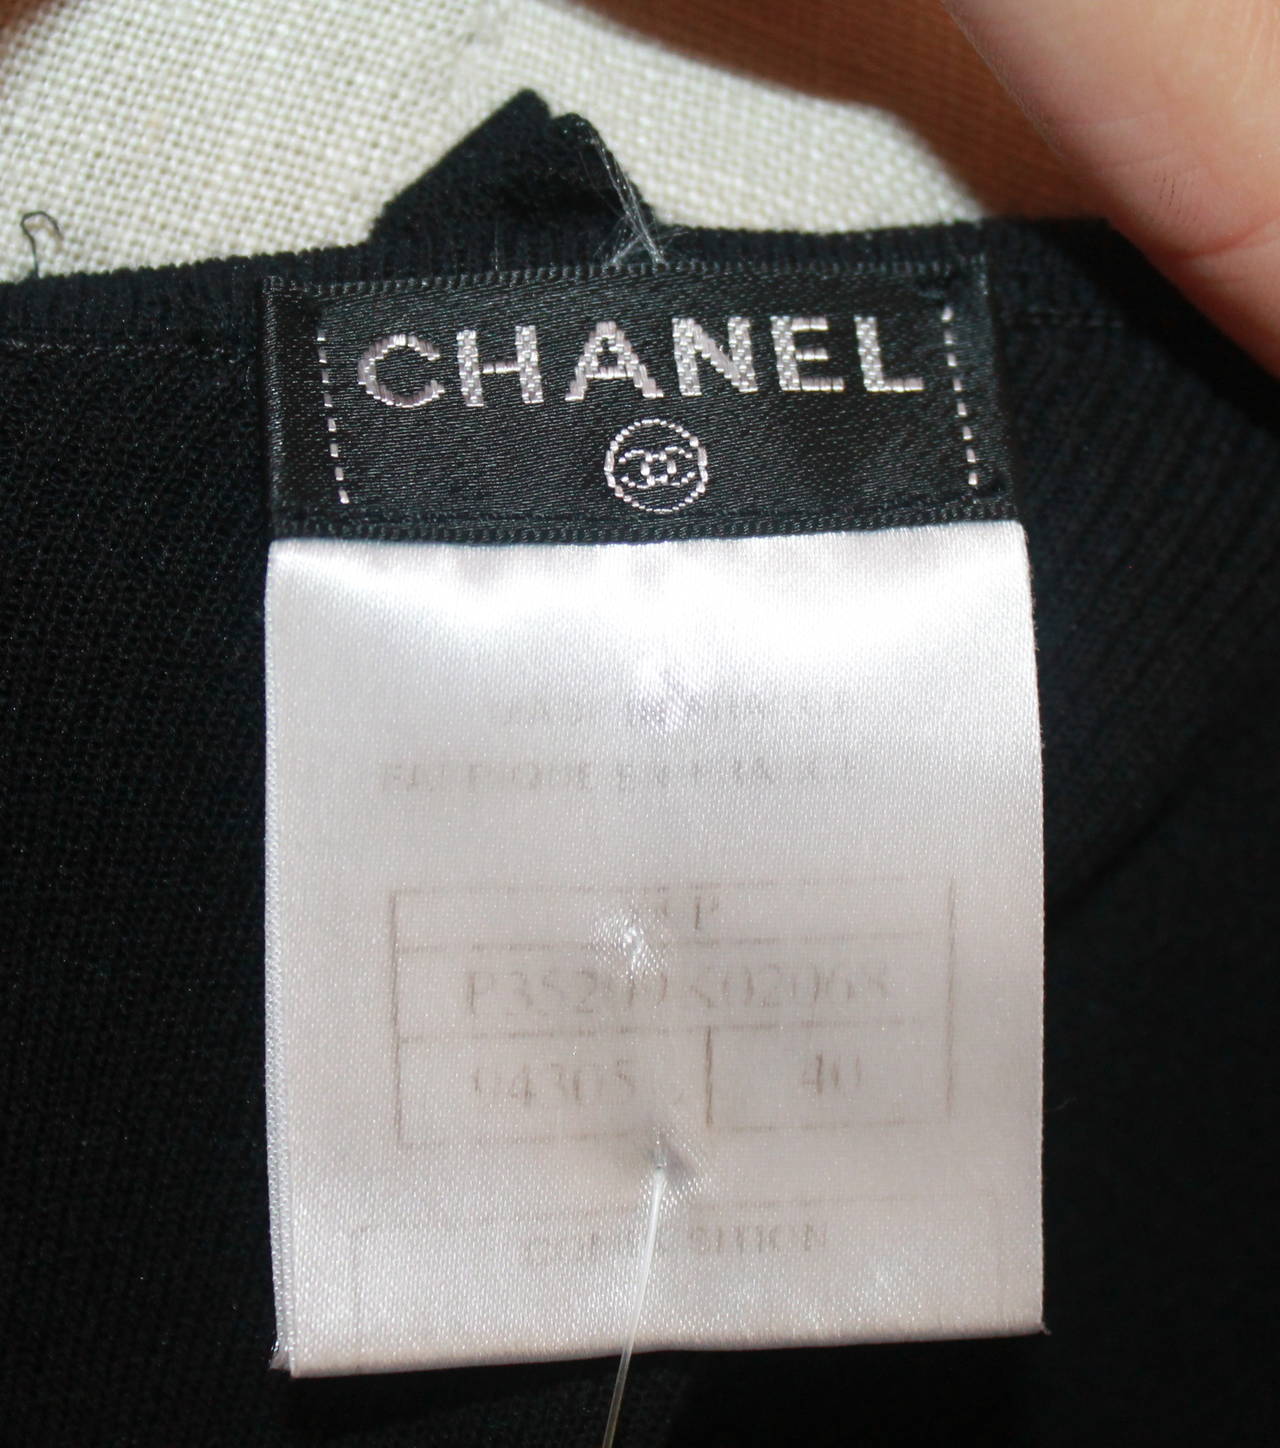 Chanel 1999 Vintage Black Shirt with Small Bow Details - 40 1